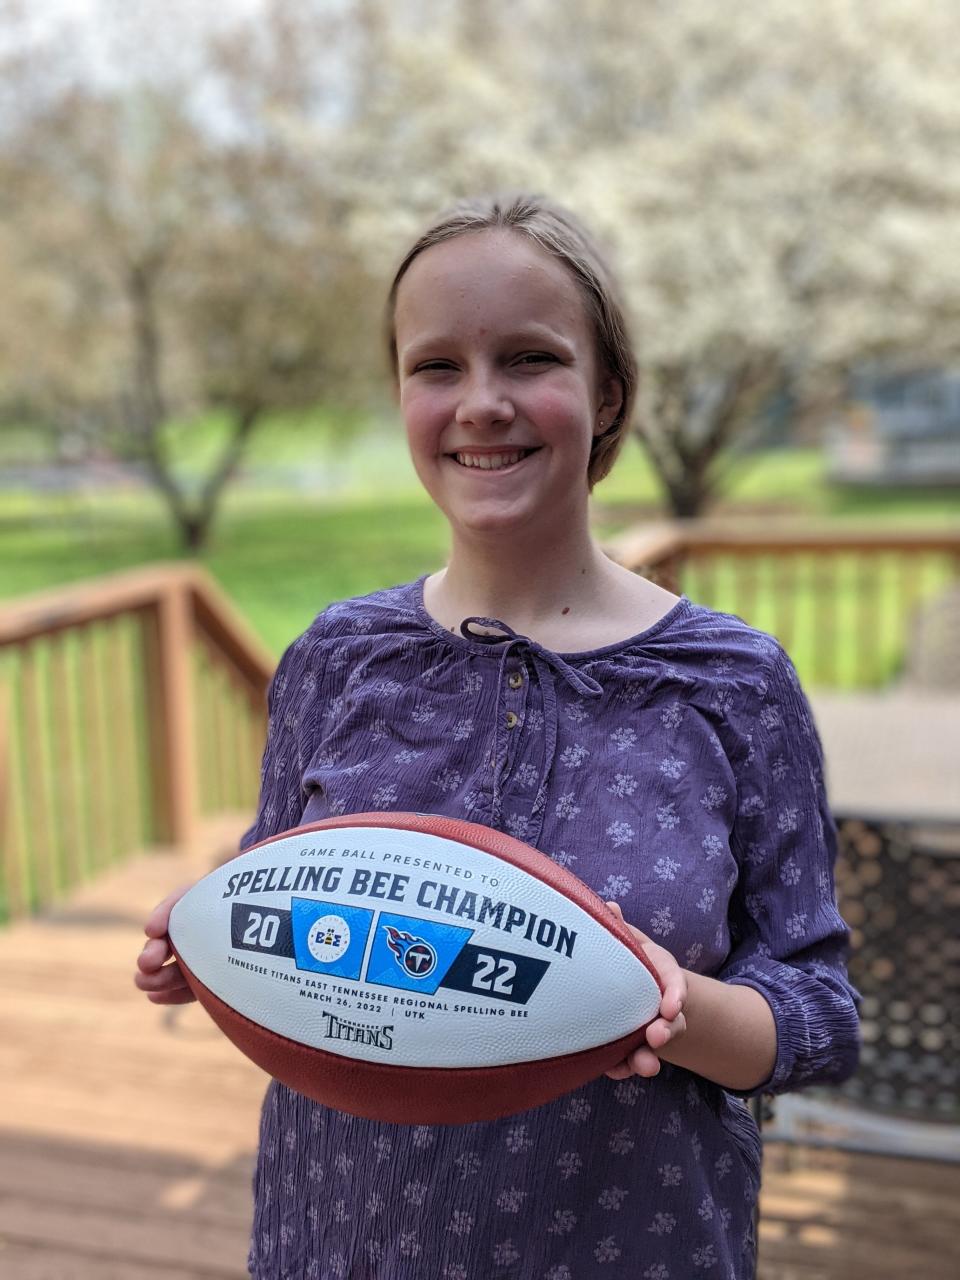 Sacred Heart Cathedral School eighth grader Miriam Campfield, 14, will compete in the 2022 Scripps National Spelling Bee in National Harbor, Maryland. She won the East Tennessee Regional Spelling Bee to make it nationals and is sponsored by the Tennessee Titans.